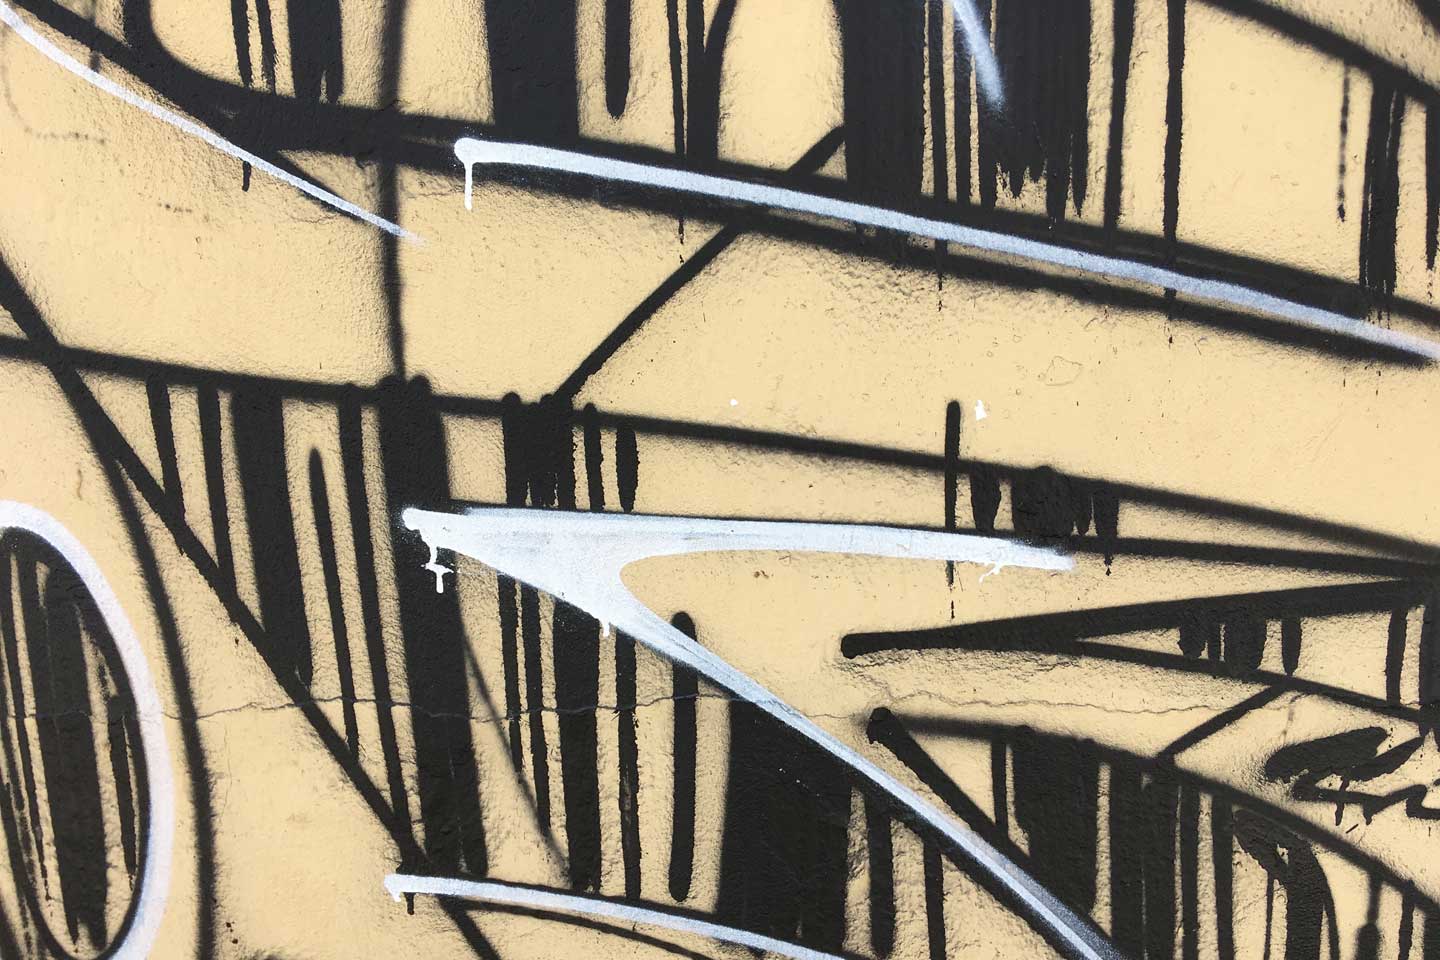 Olhao Street Art - black and white patterns on a beige background